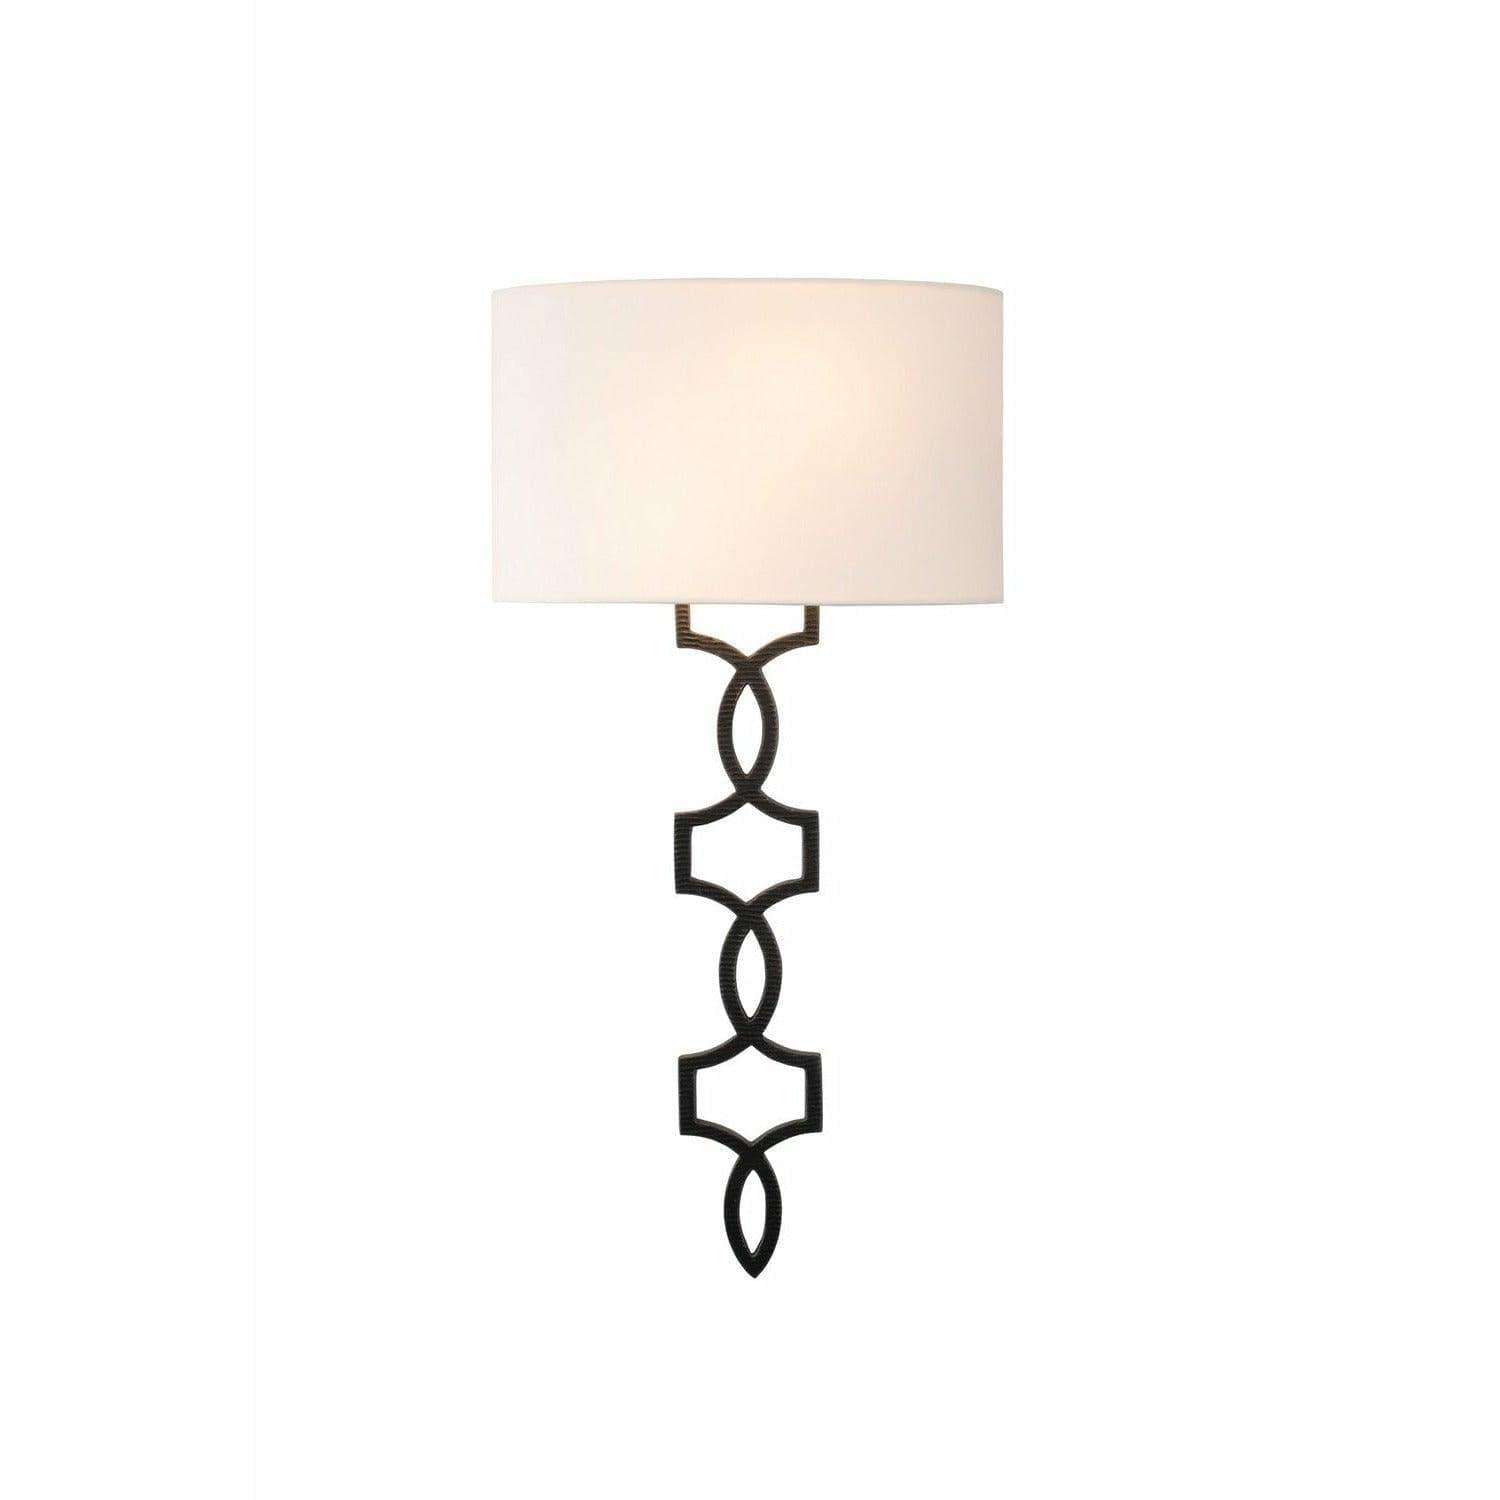 Kalco - Chateau Wall Sconce - 510520HB | Montreal Lighting & Hardware